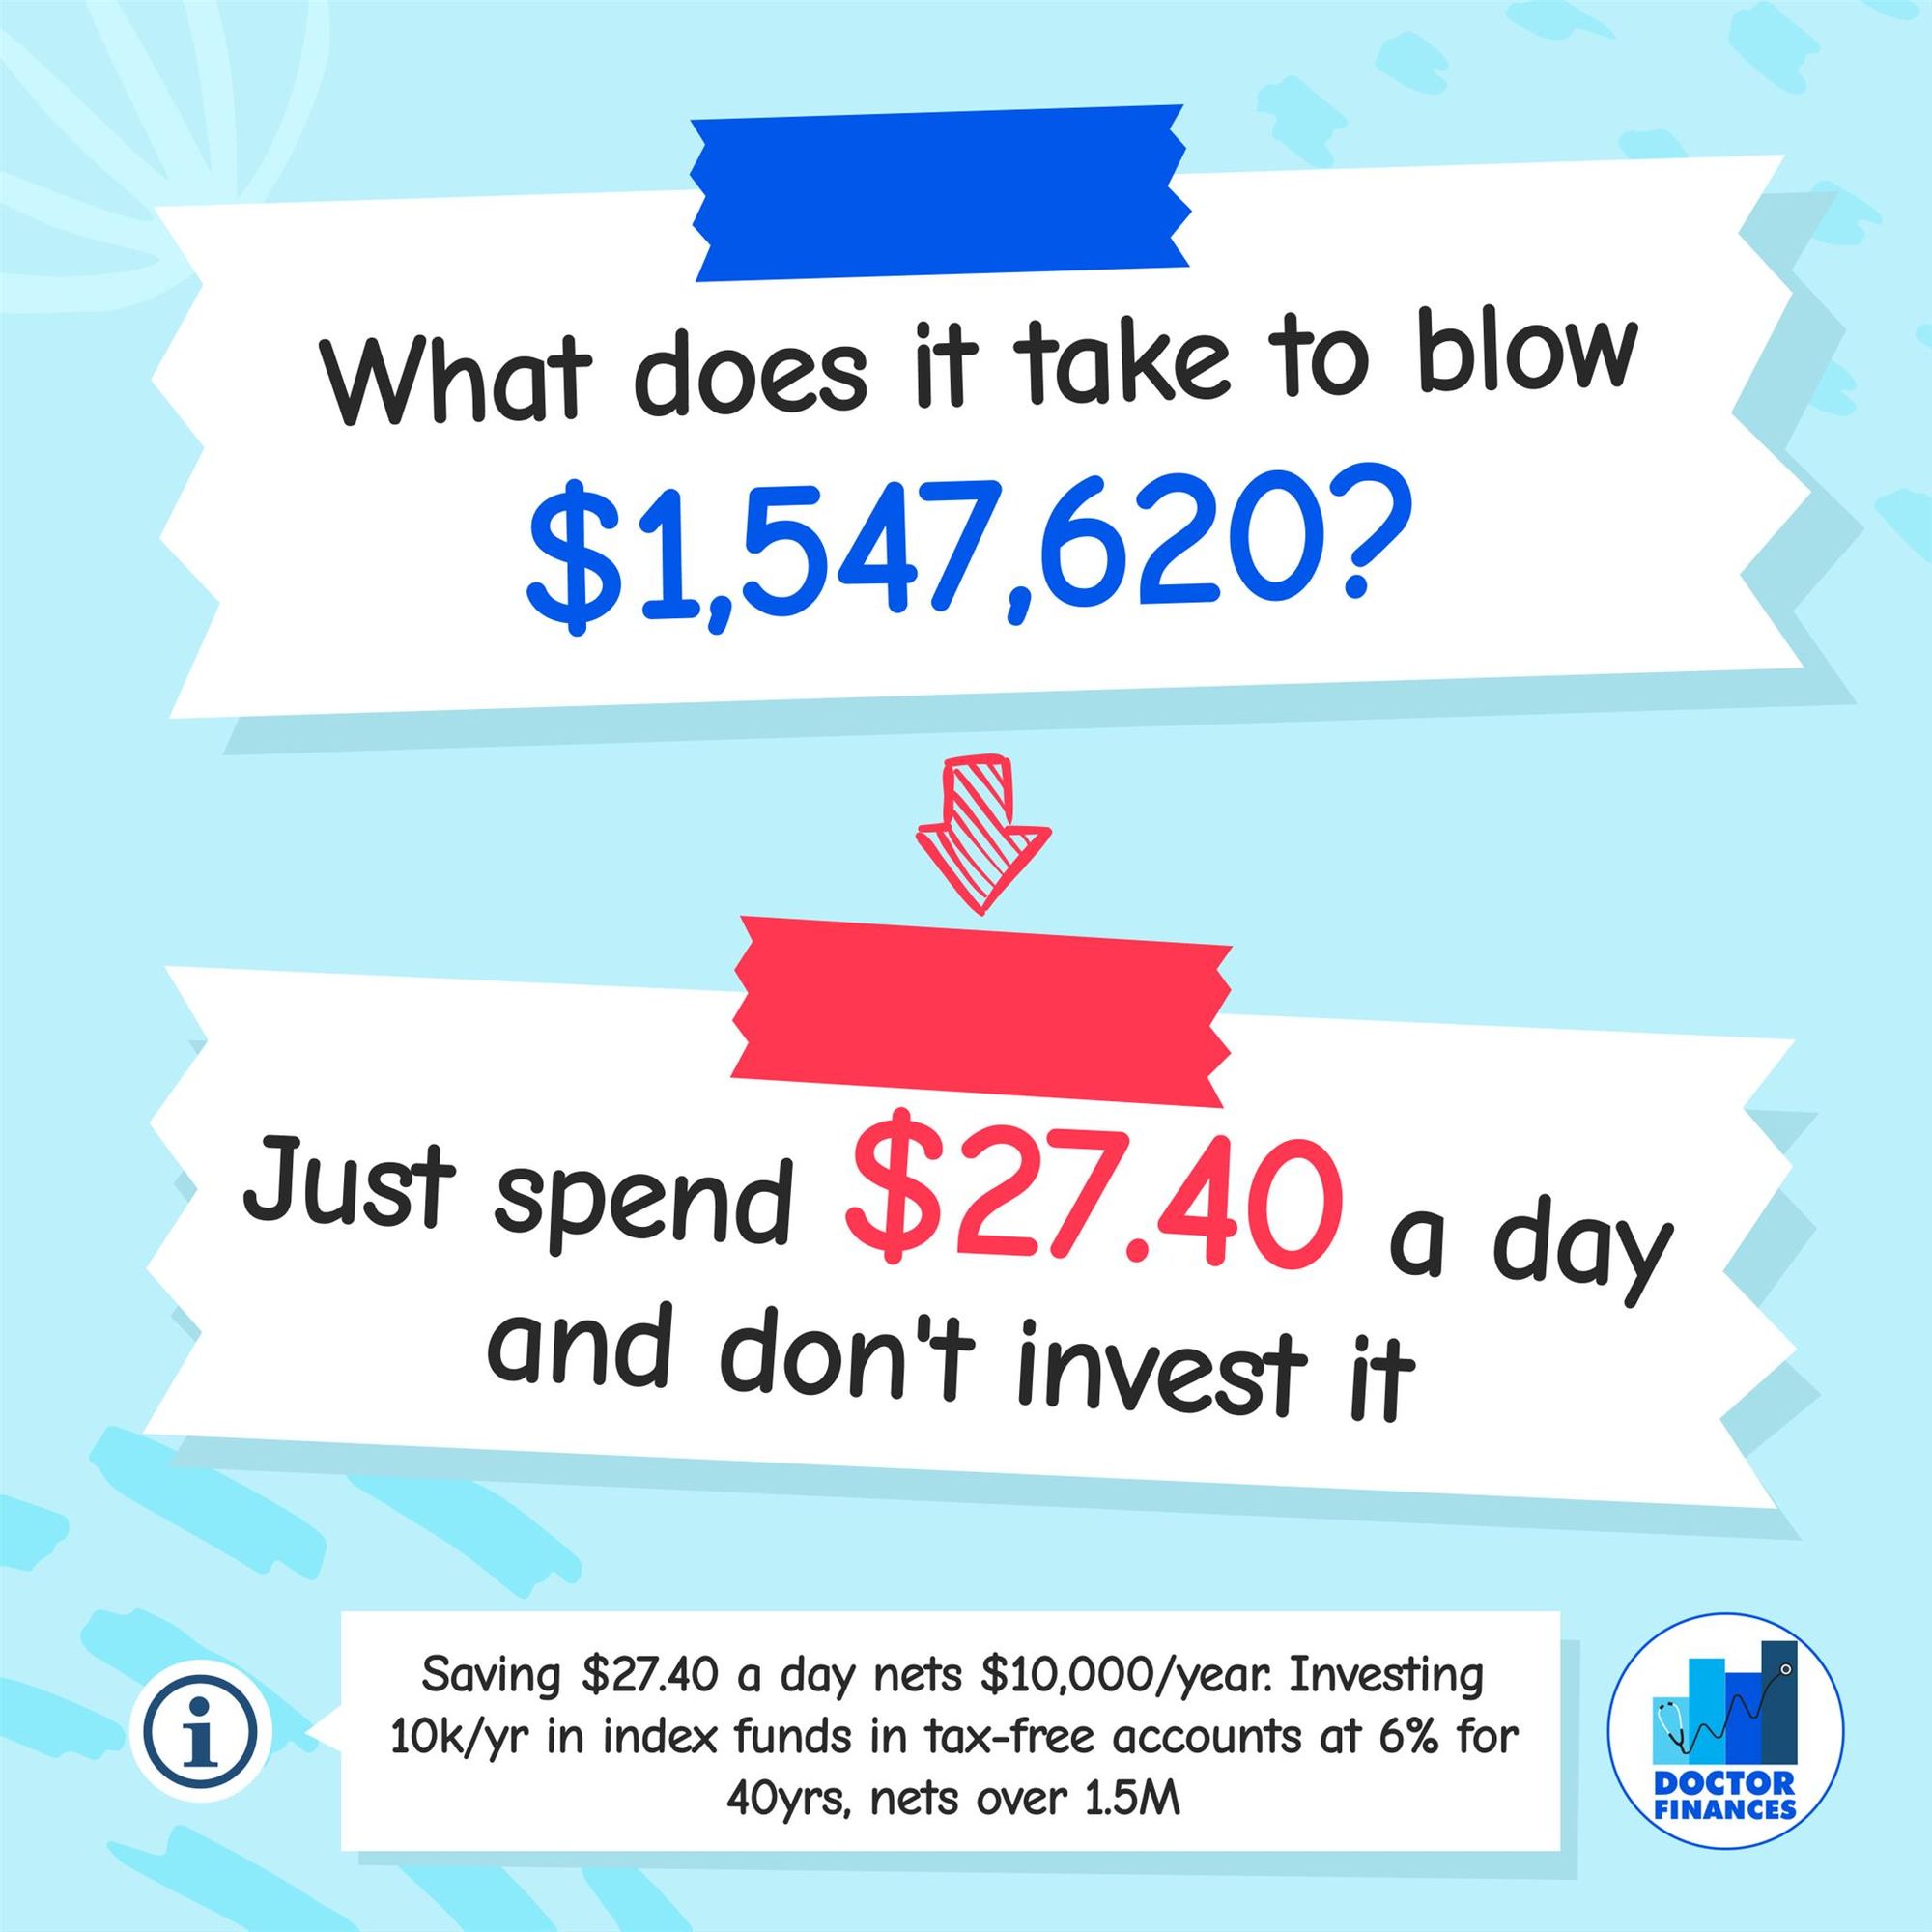 What Does It Take to Blow $1.5M?